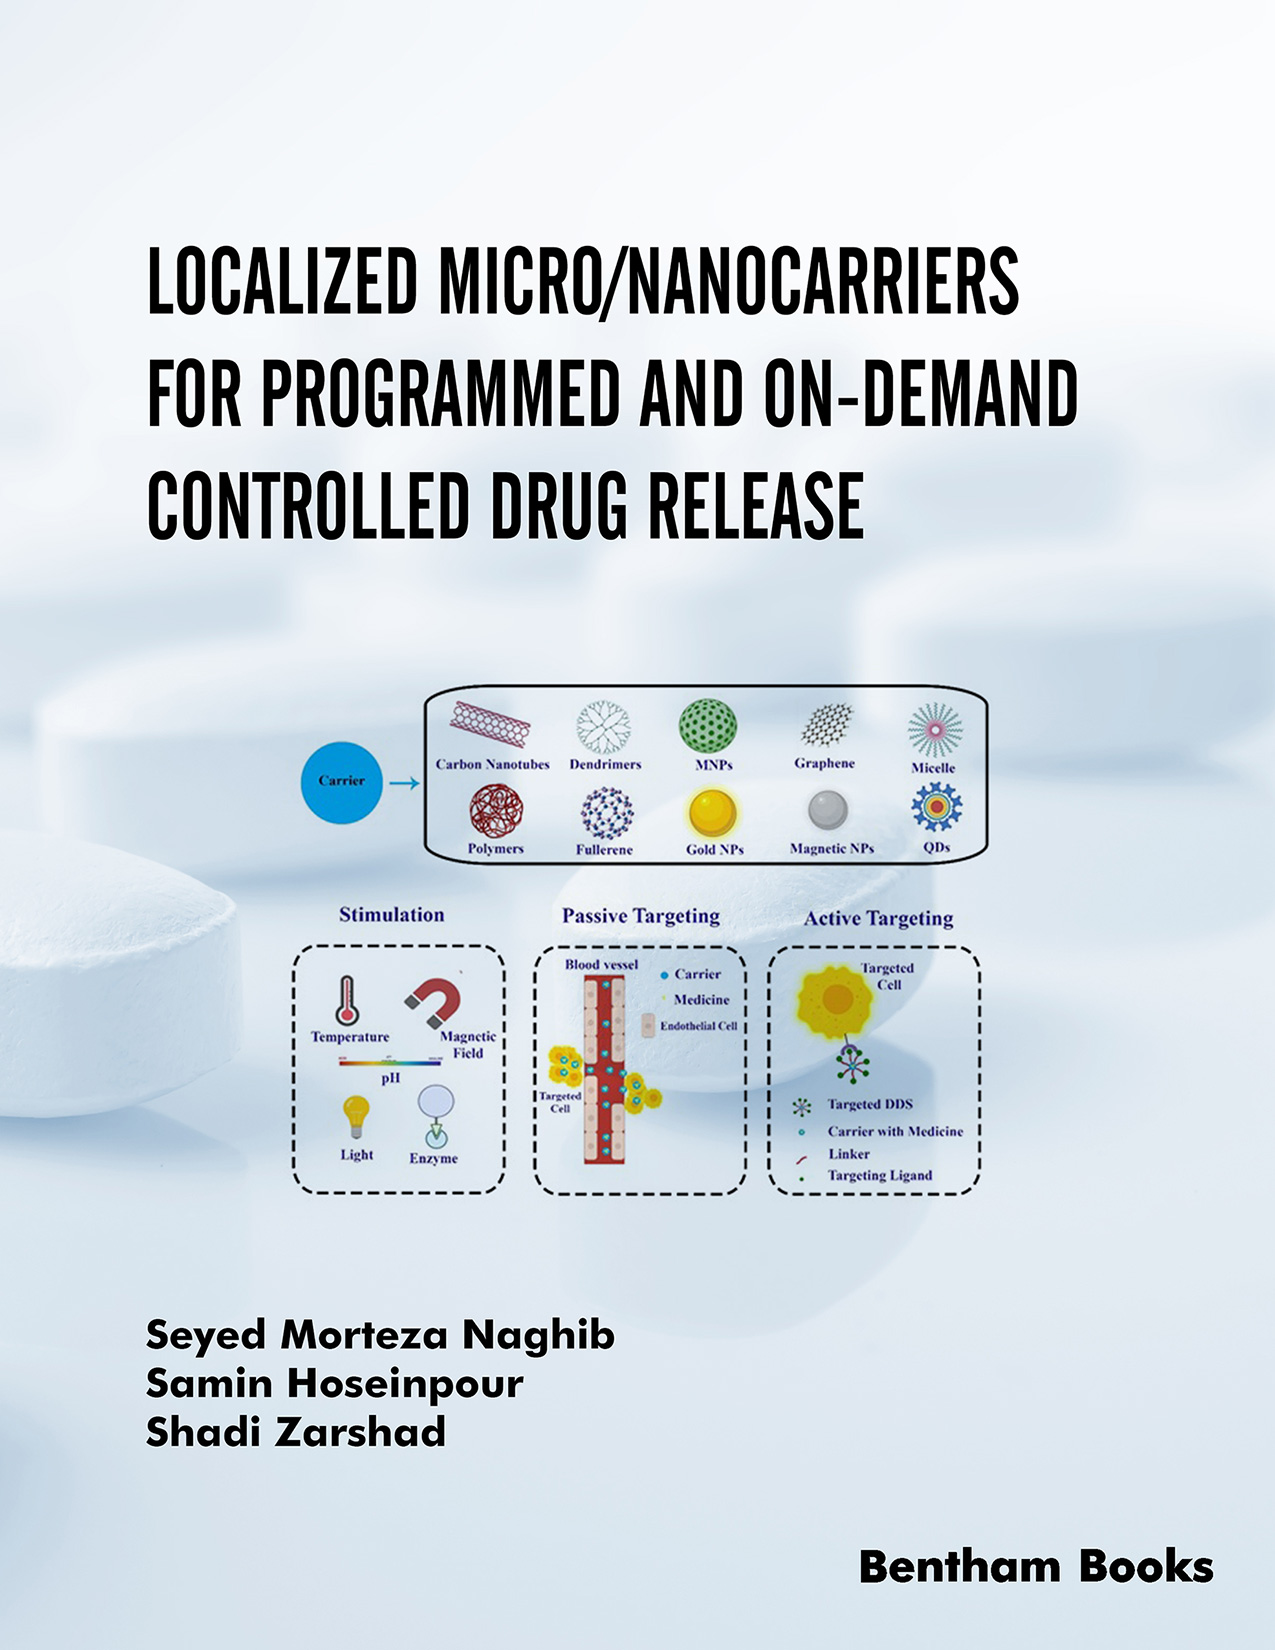 Localized Micro/Nanocarriers for Programmed and On-Demand Controlled Drug Release